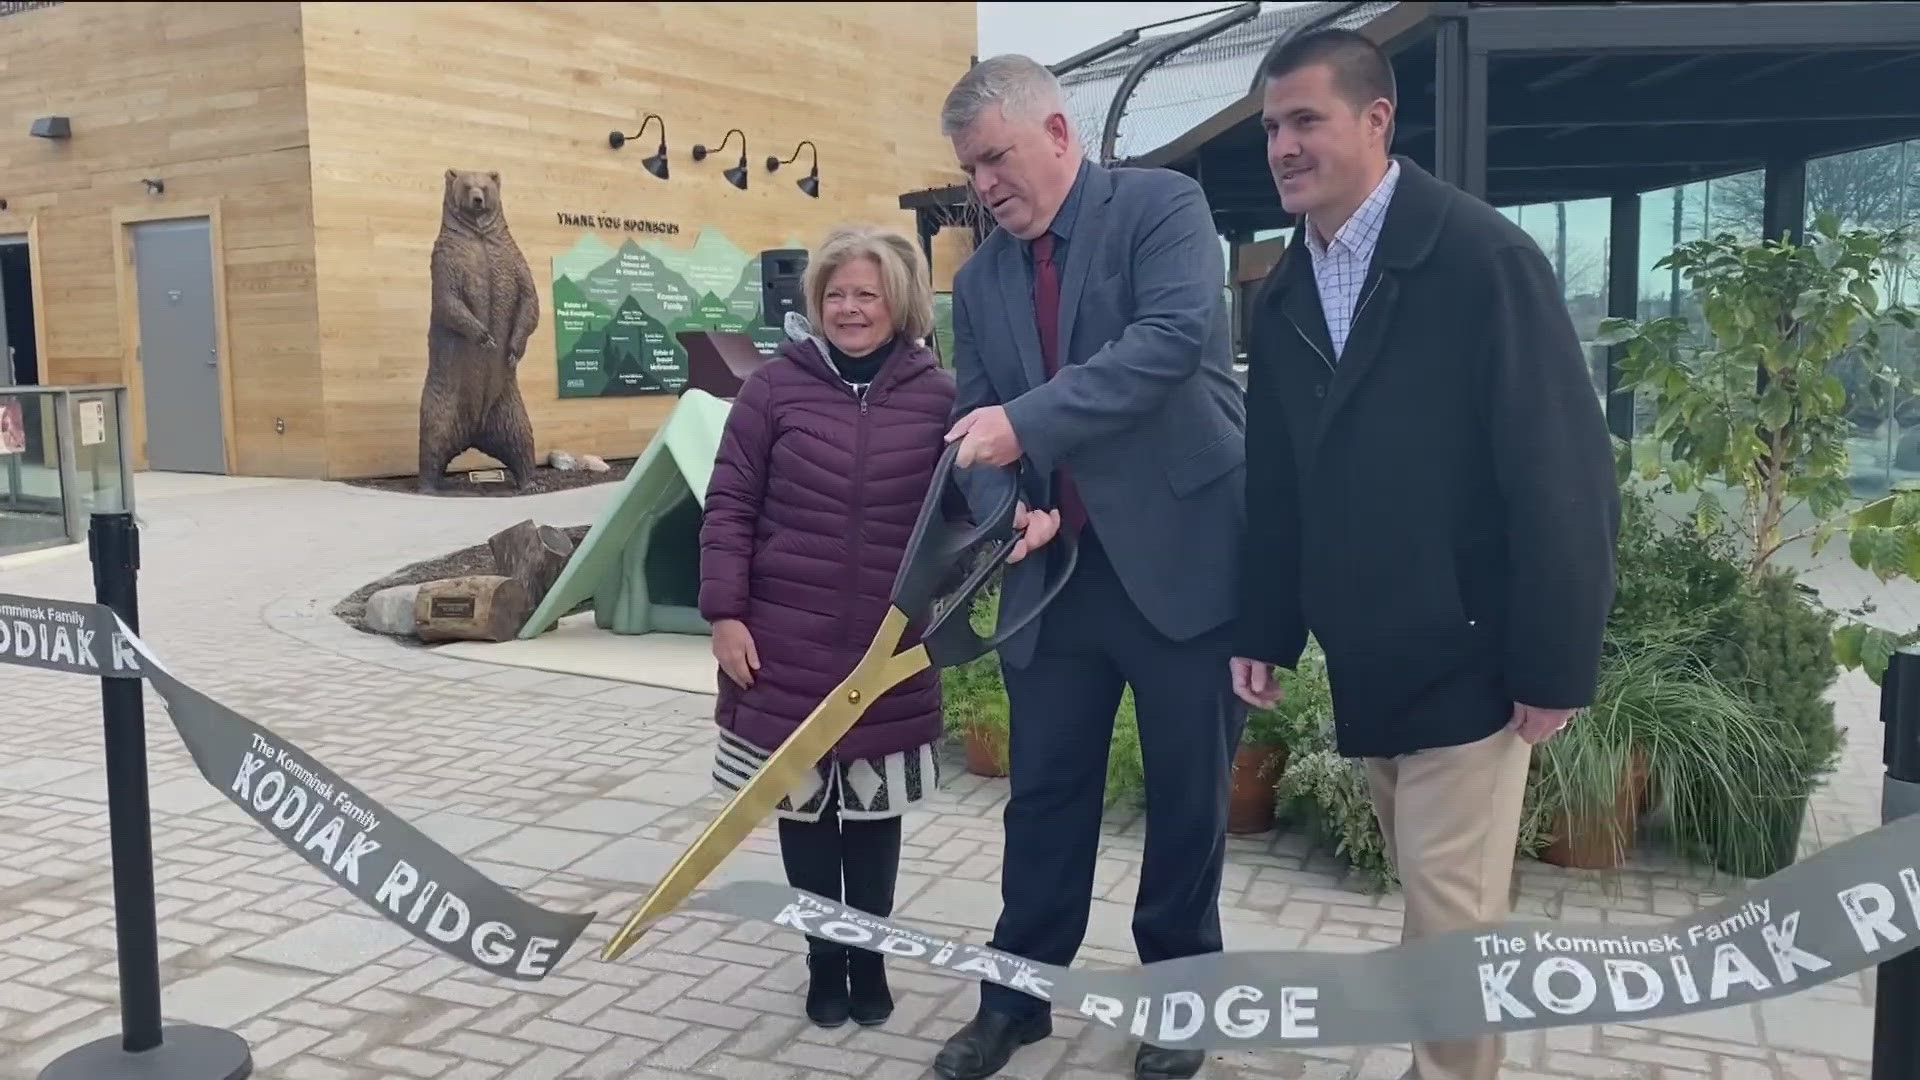 The Toledo Zoo planned for five years to create the Kodiak Ridge and that plan came to fruition Thursday.